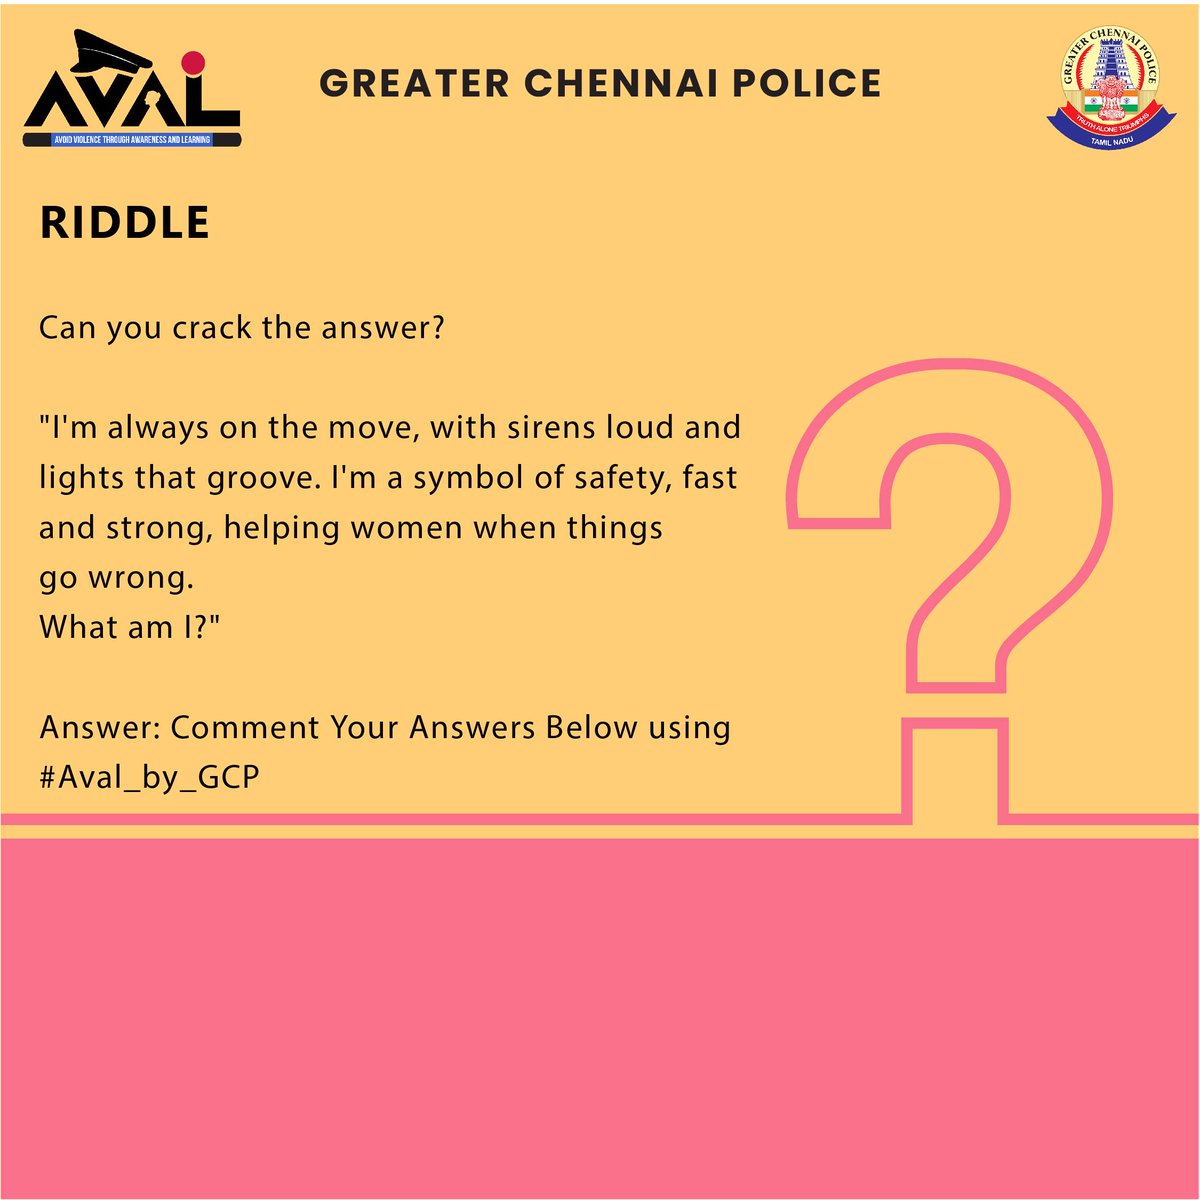 Guess the riddle. Share your guess and learn more 

#RiddleTime #PinkPatrol #SafetyFirst #PinkPatrol_GCP #அவள் #avalbygcp #avalsafety #avalawareness #GCPAVAL